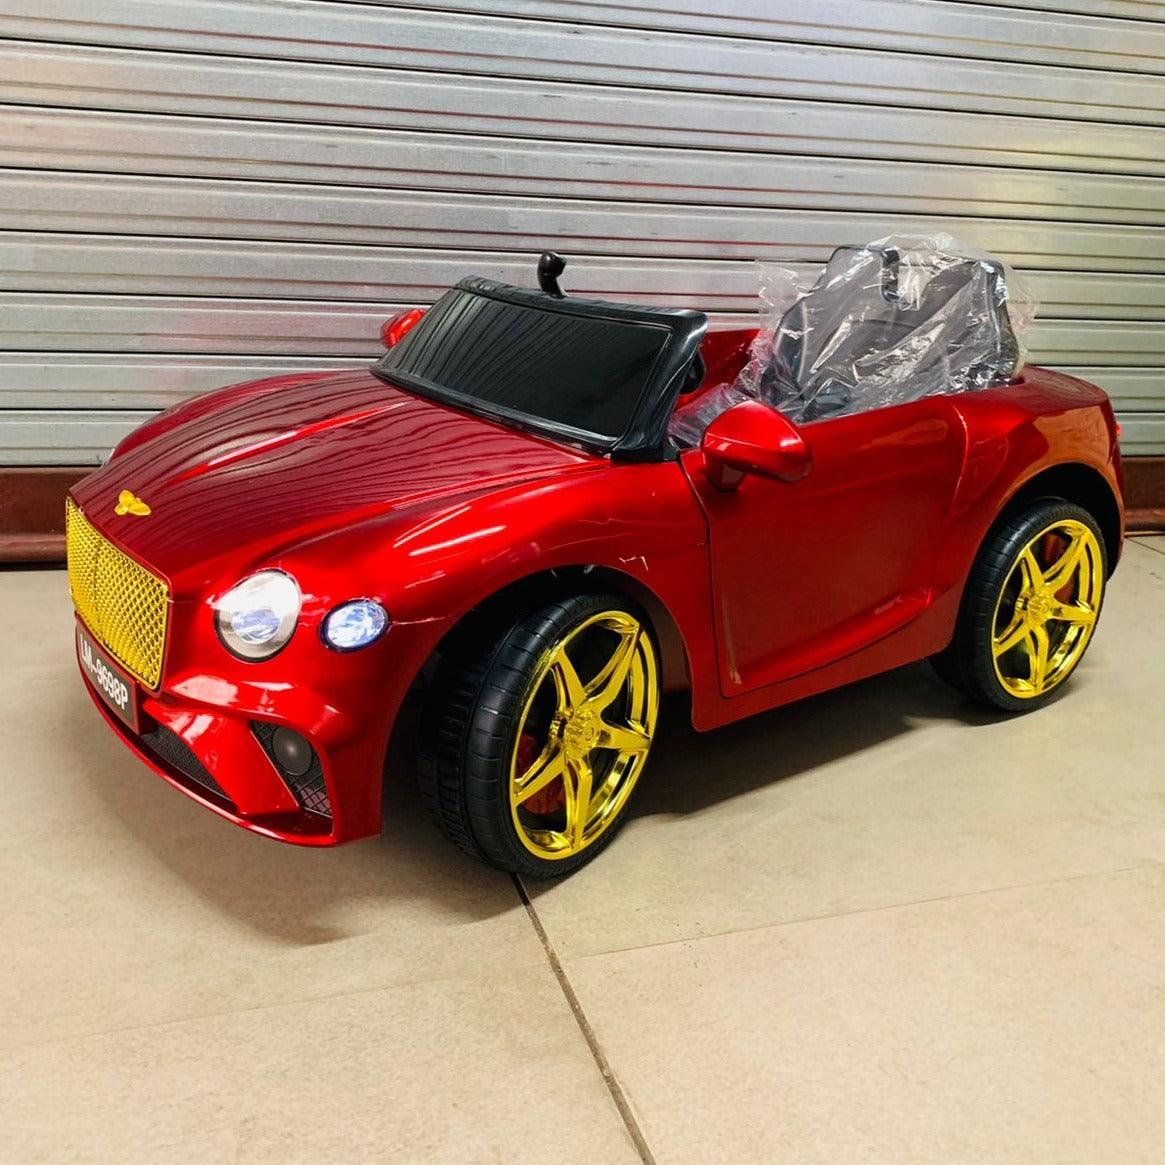 12V Bentley Ride on At-2188 Car for Kids with Nonslip tires | Automatic brake, Remote & Manual Drive - 11Cart